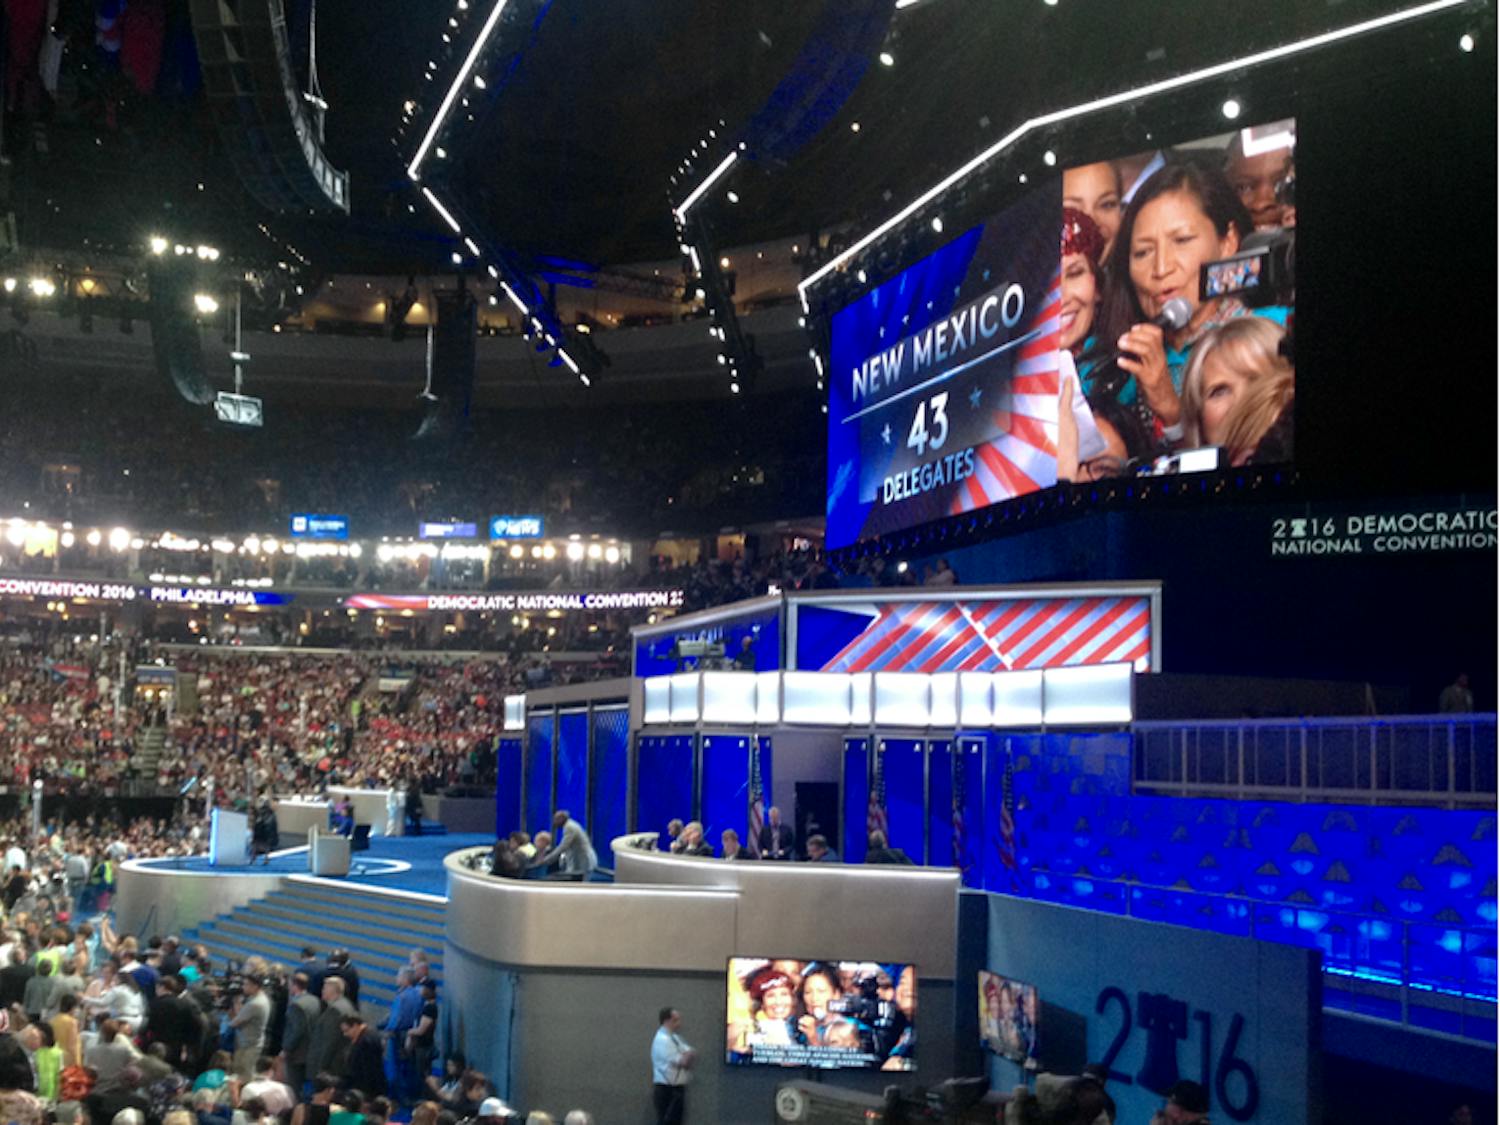 New Mexico's delegates have their votes recorded at the Democratic National Convention in Philadelphia on July 26, 2016.